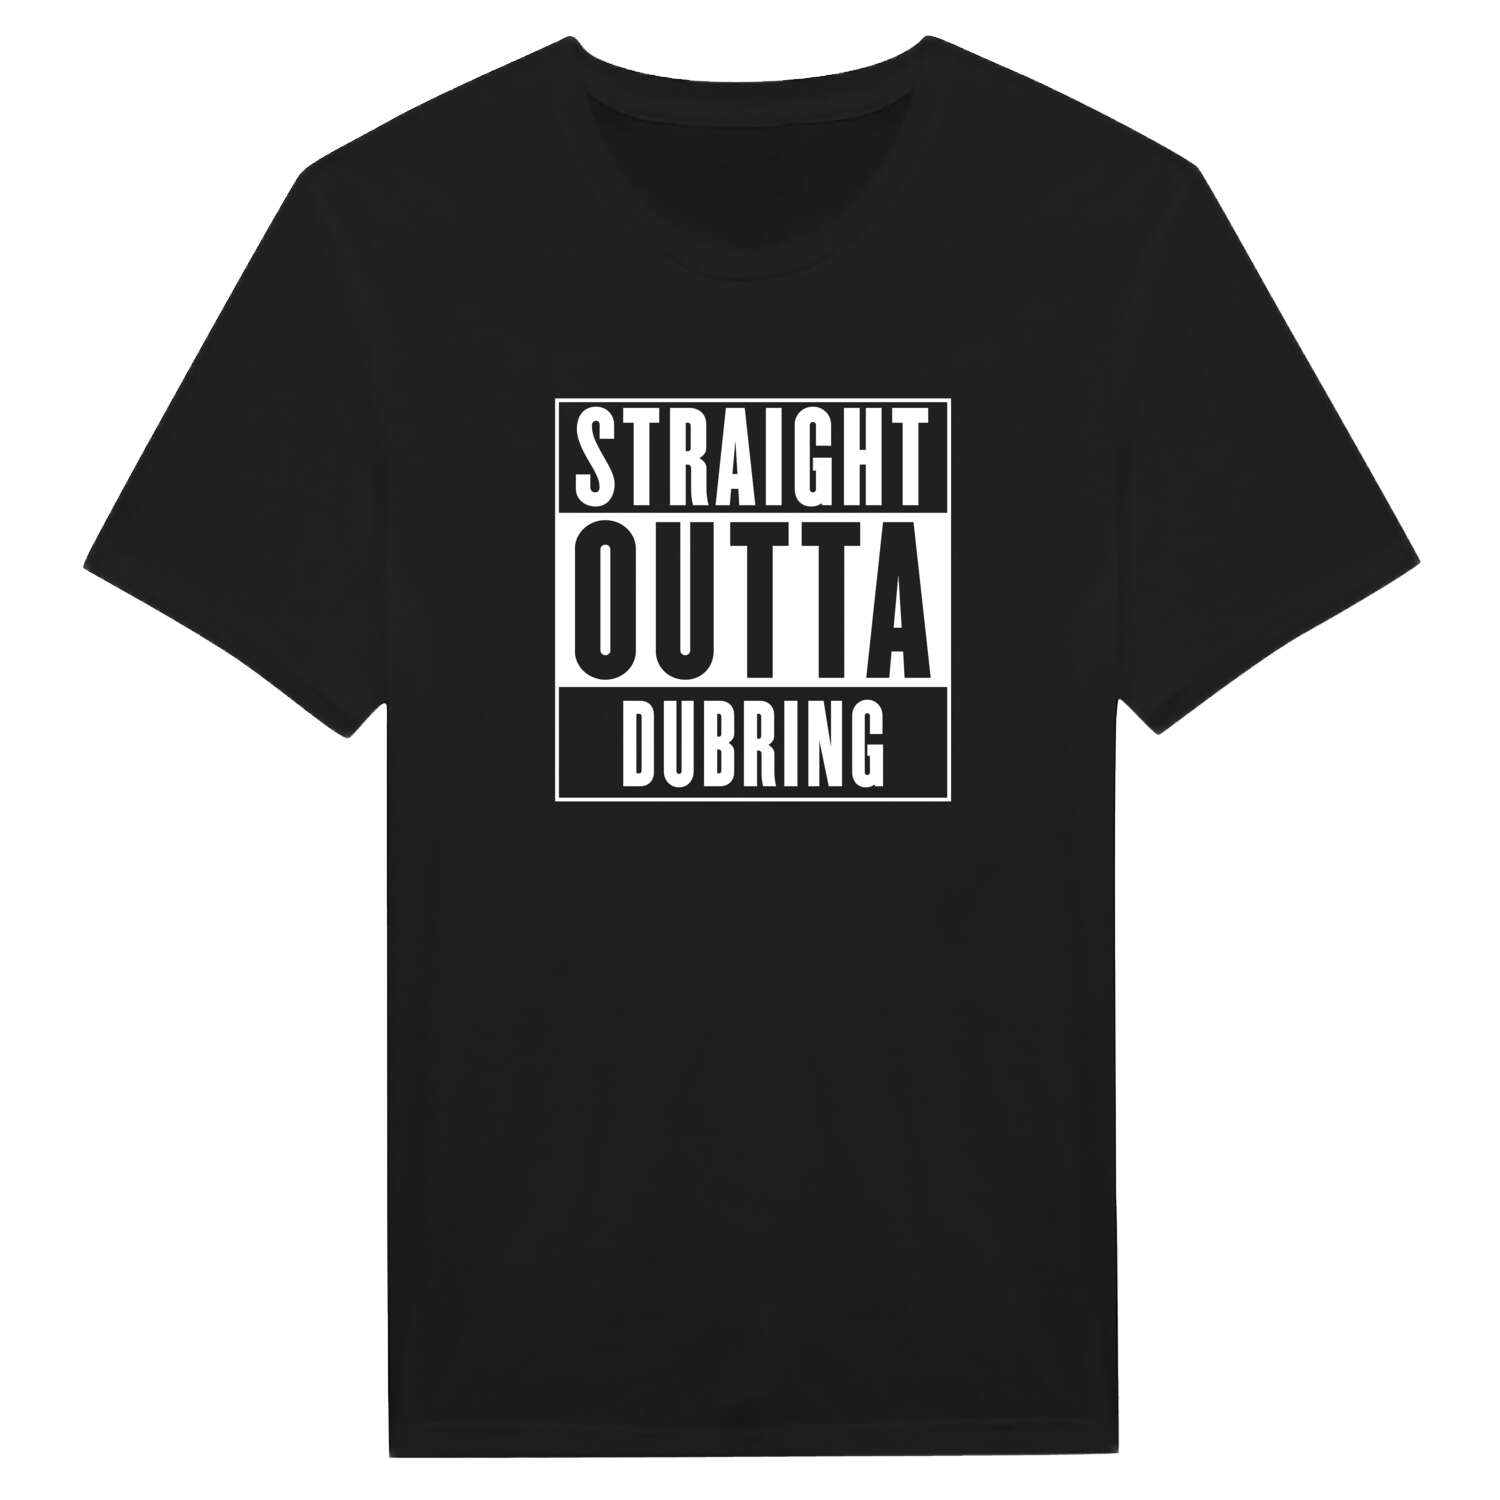 Dubring T-Shirt »Straight Outta«